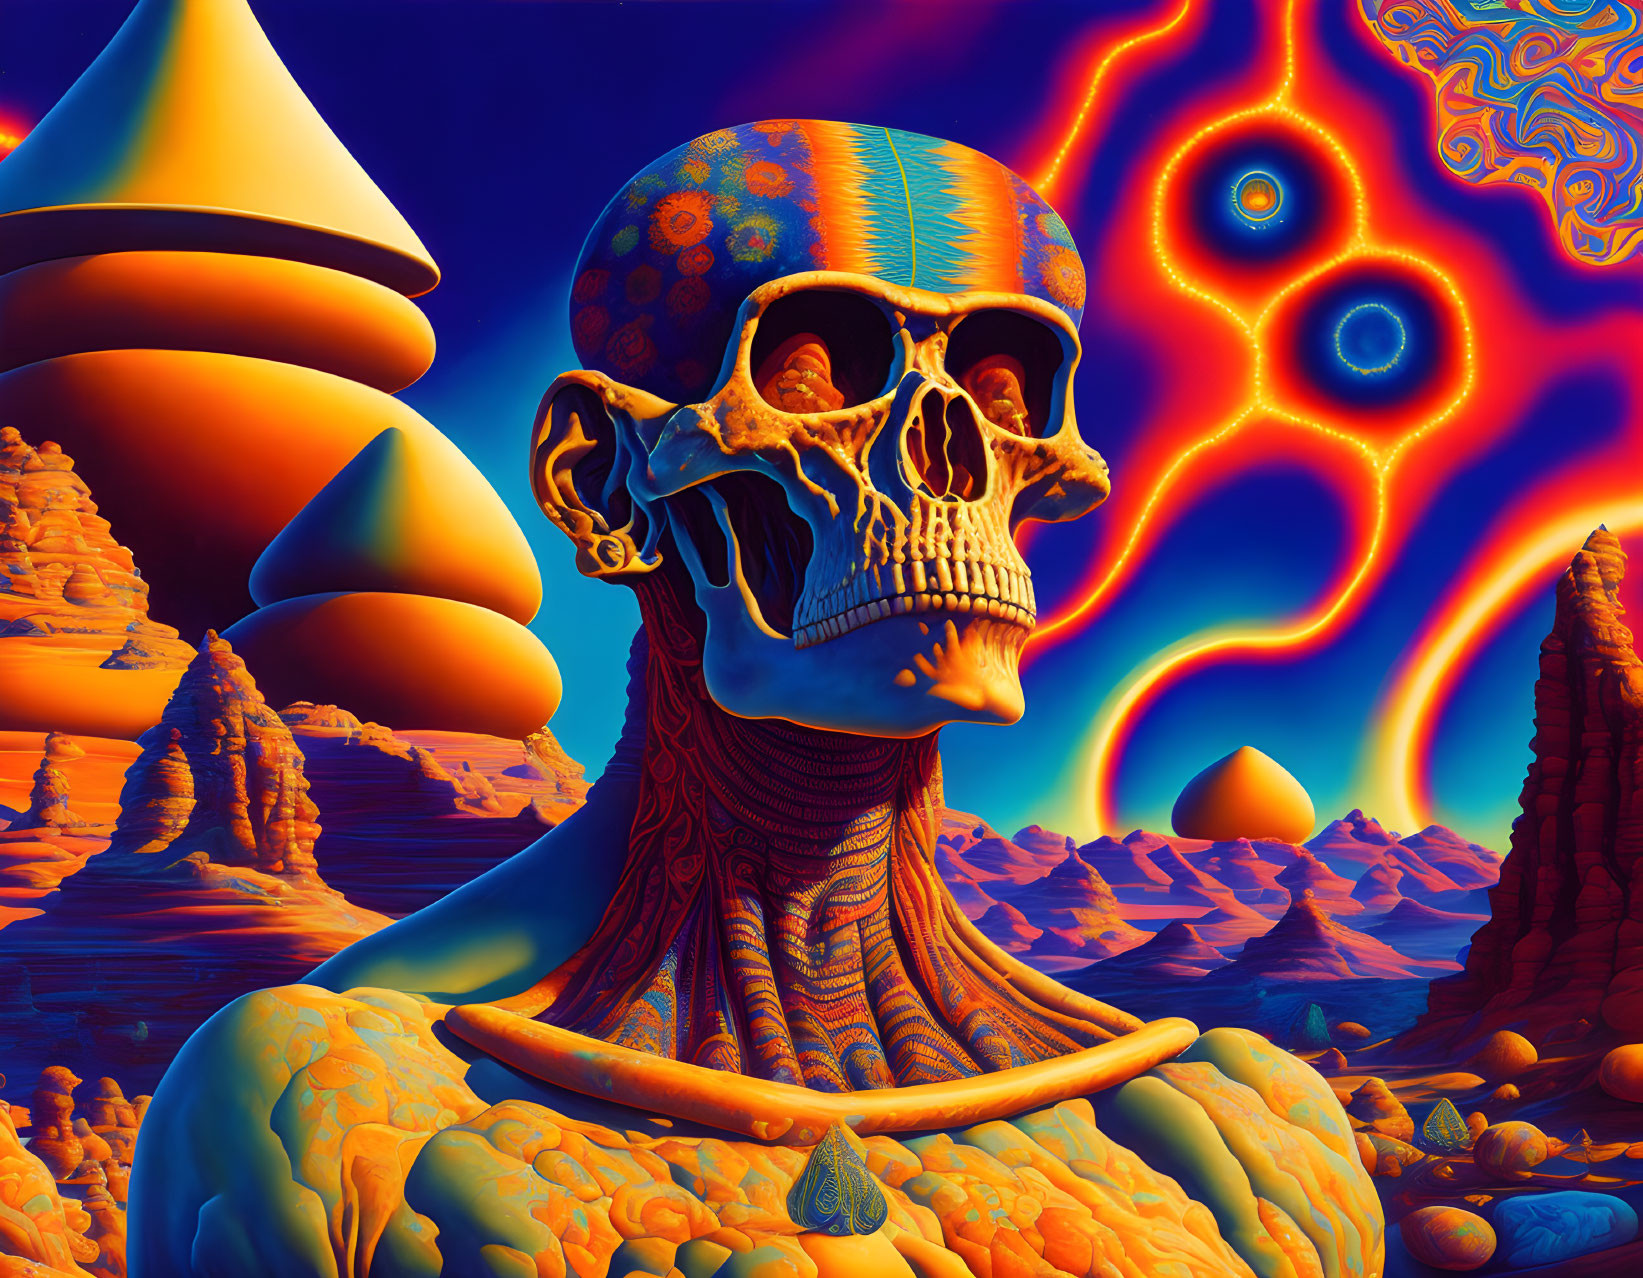 Surrealist desert landscape with skull-headed figure and psychedelic patterns